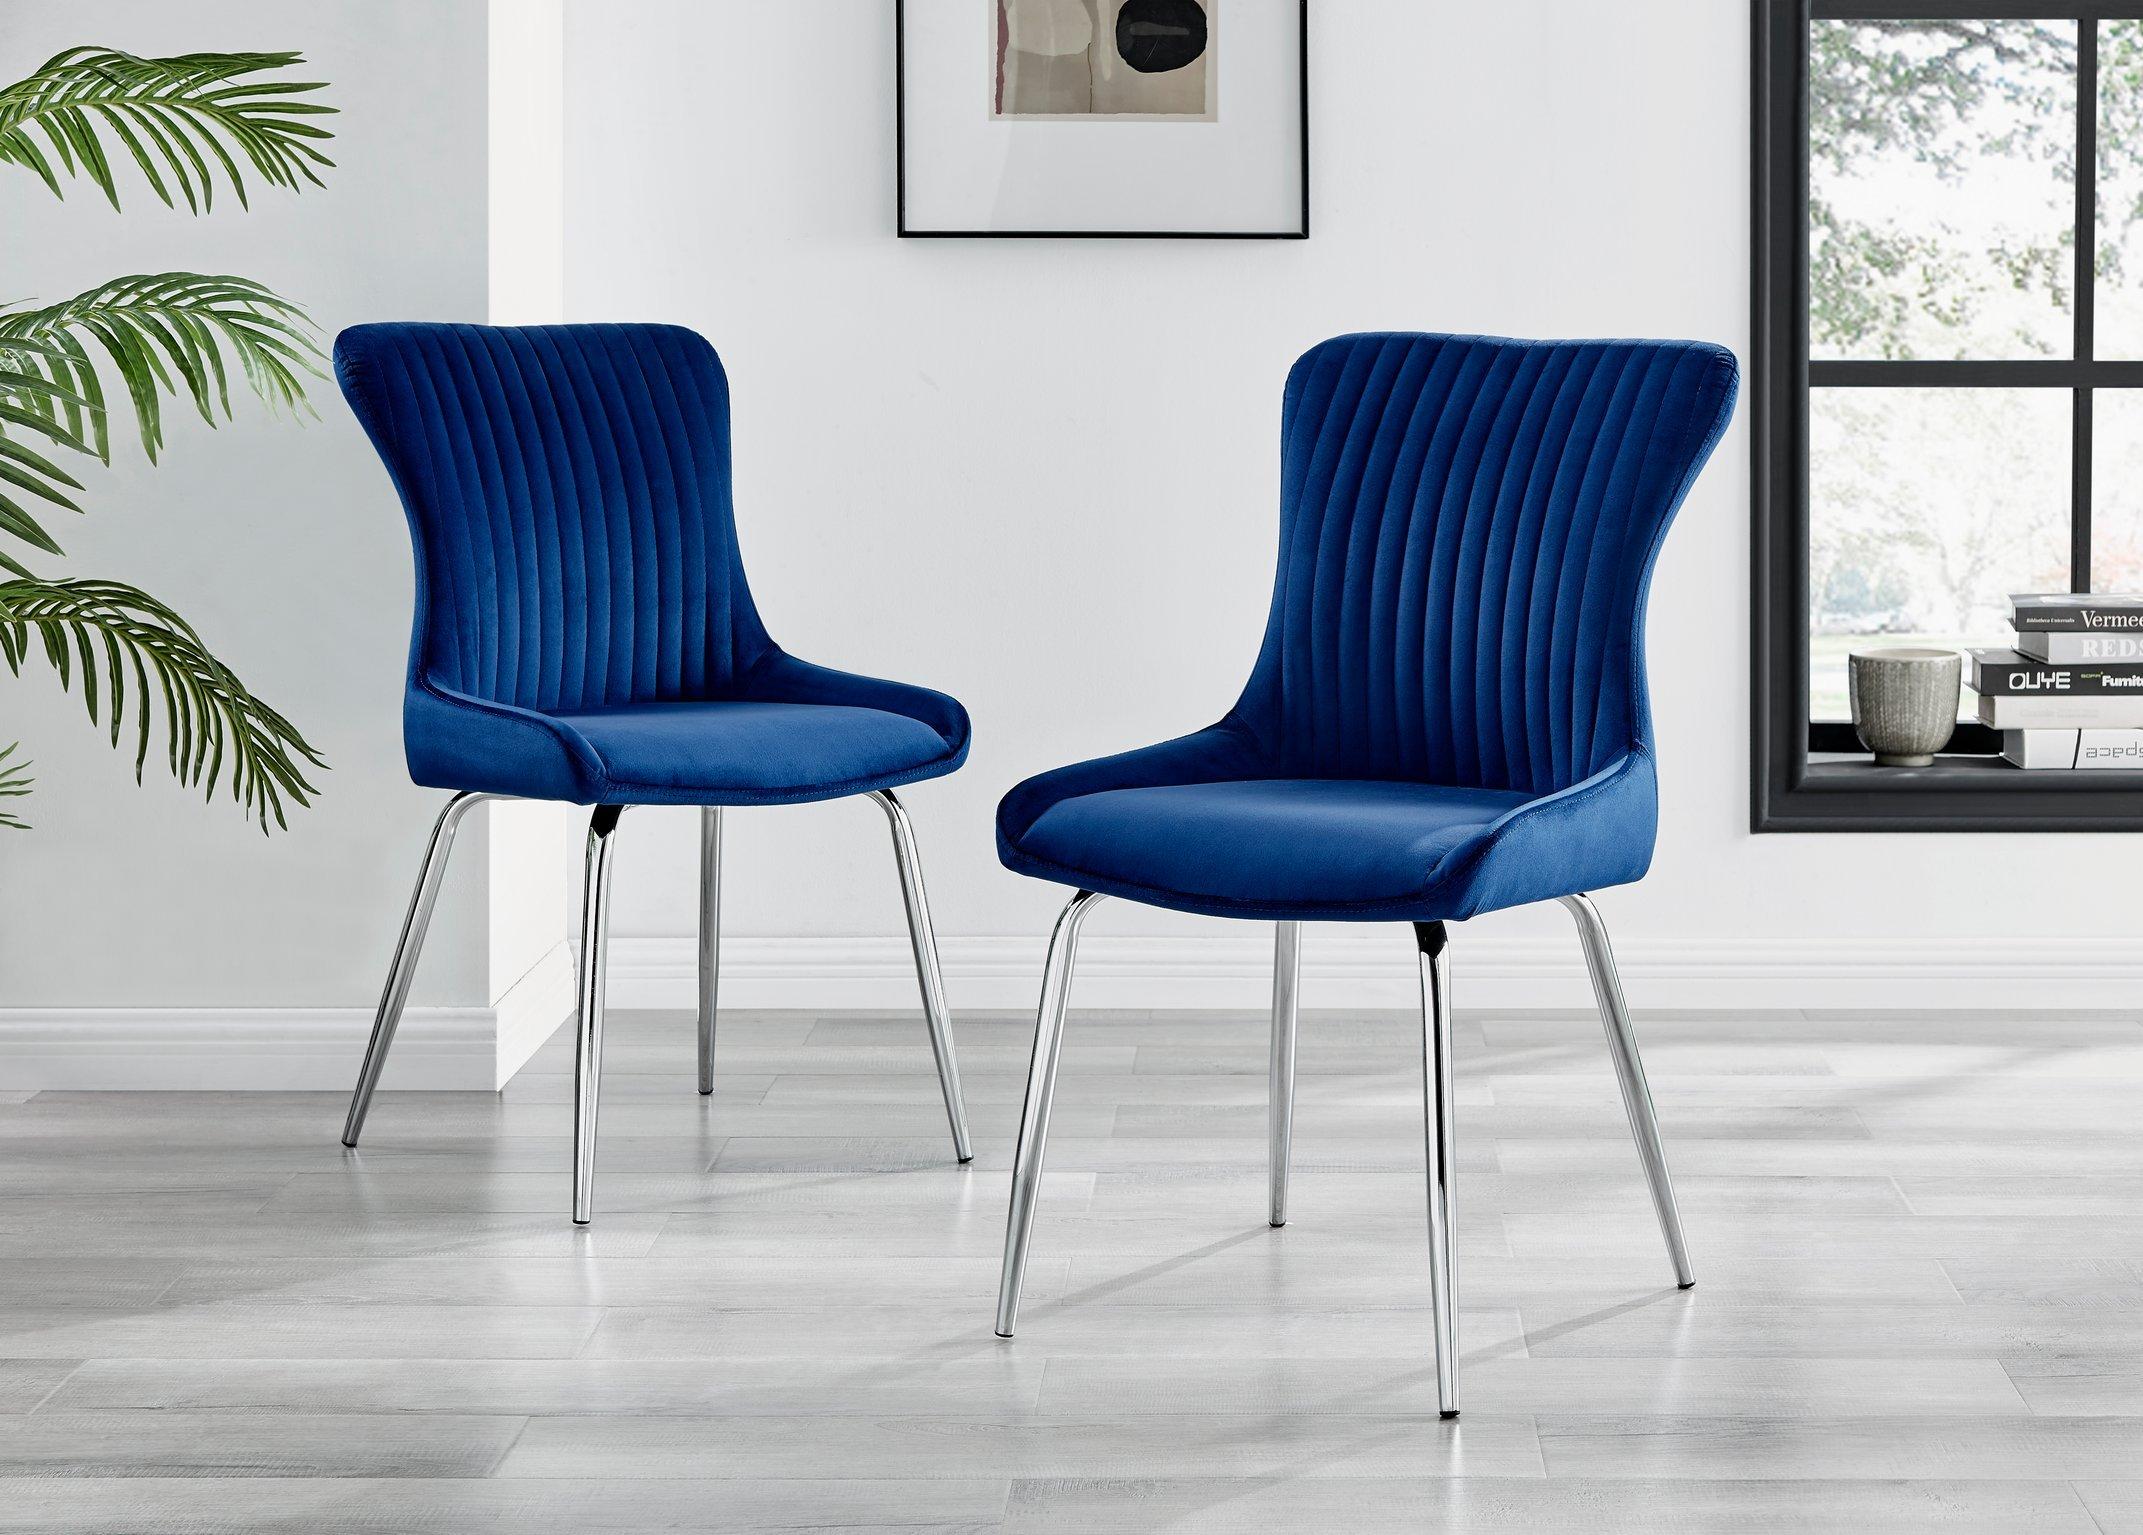 Set of 2 Nora Deep Padded Luxurious Dining Chairs Upholstered In Soft Velvet With Chrome Legs